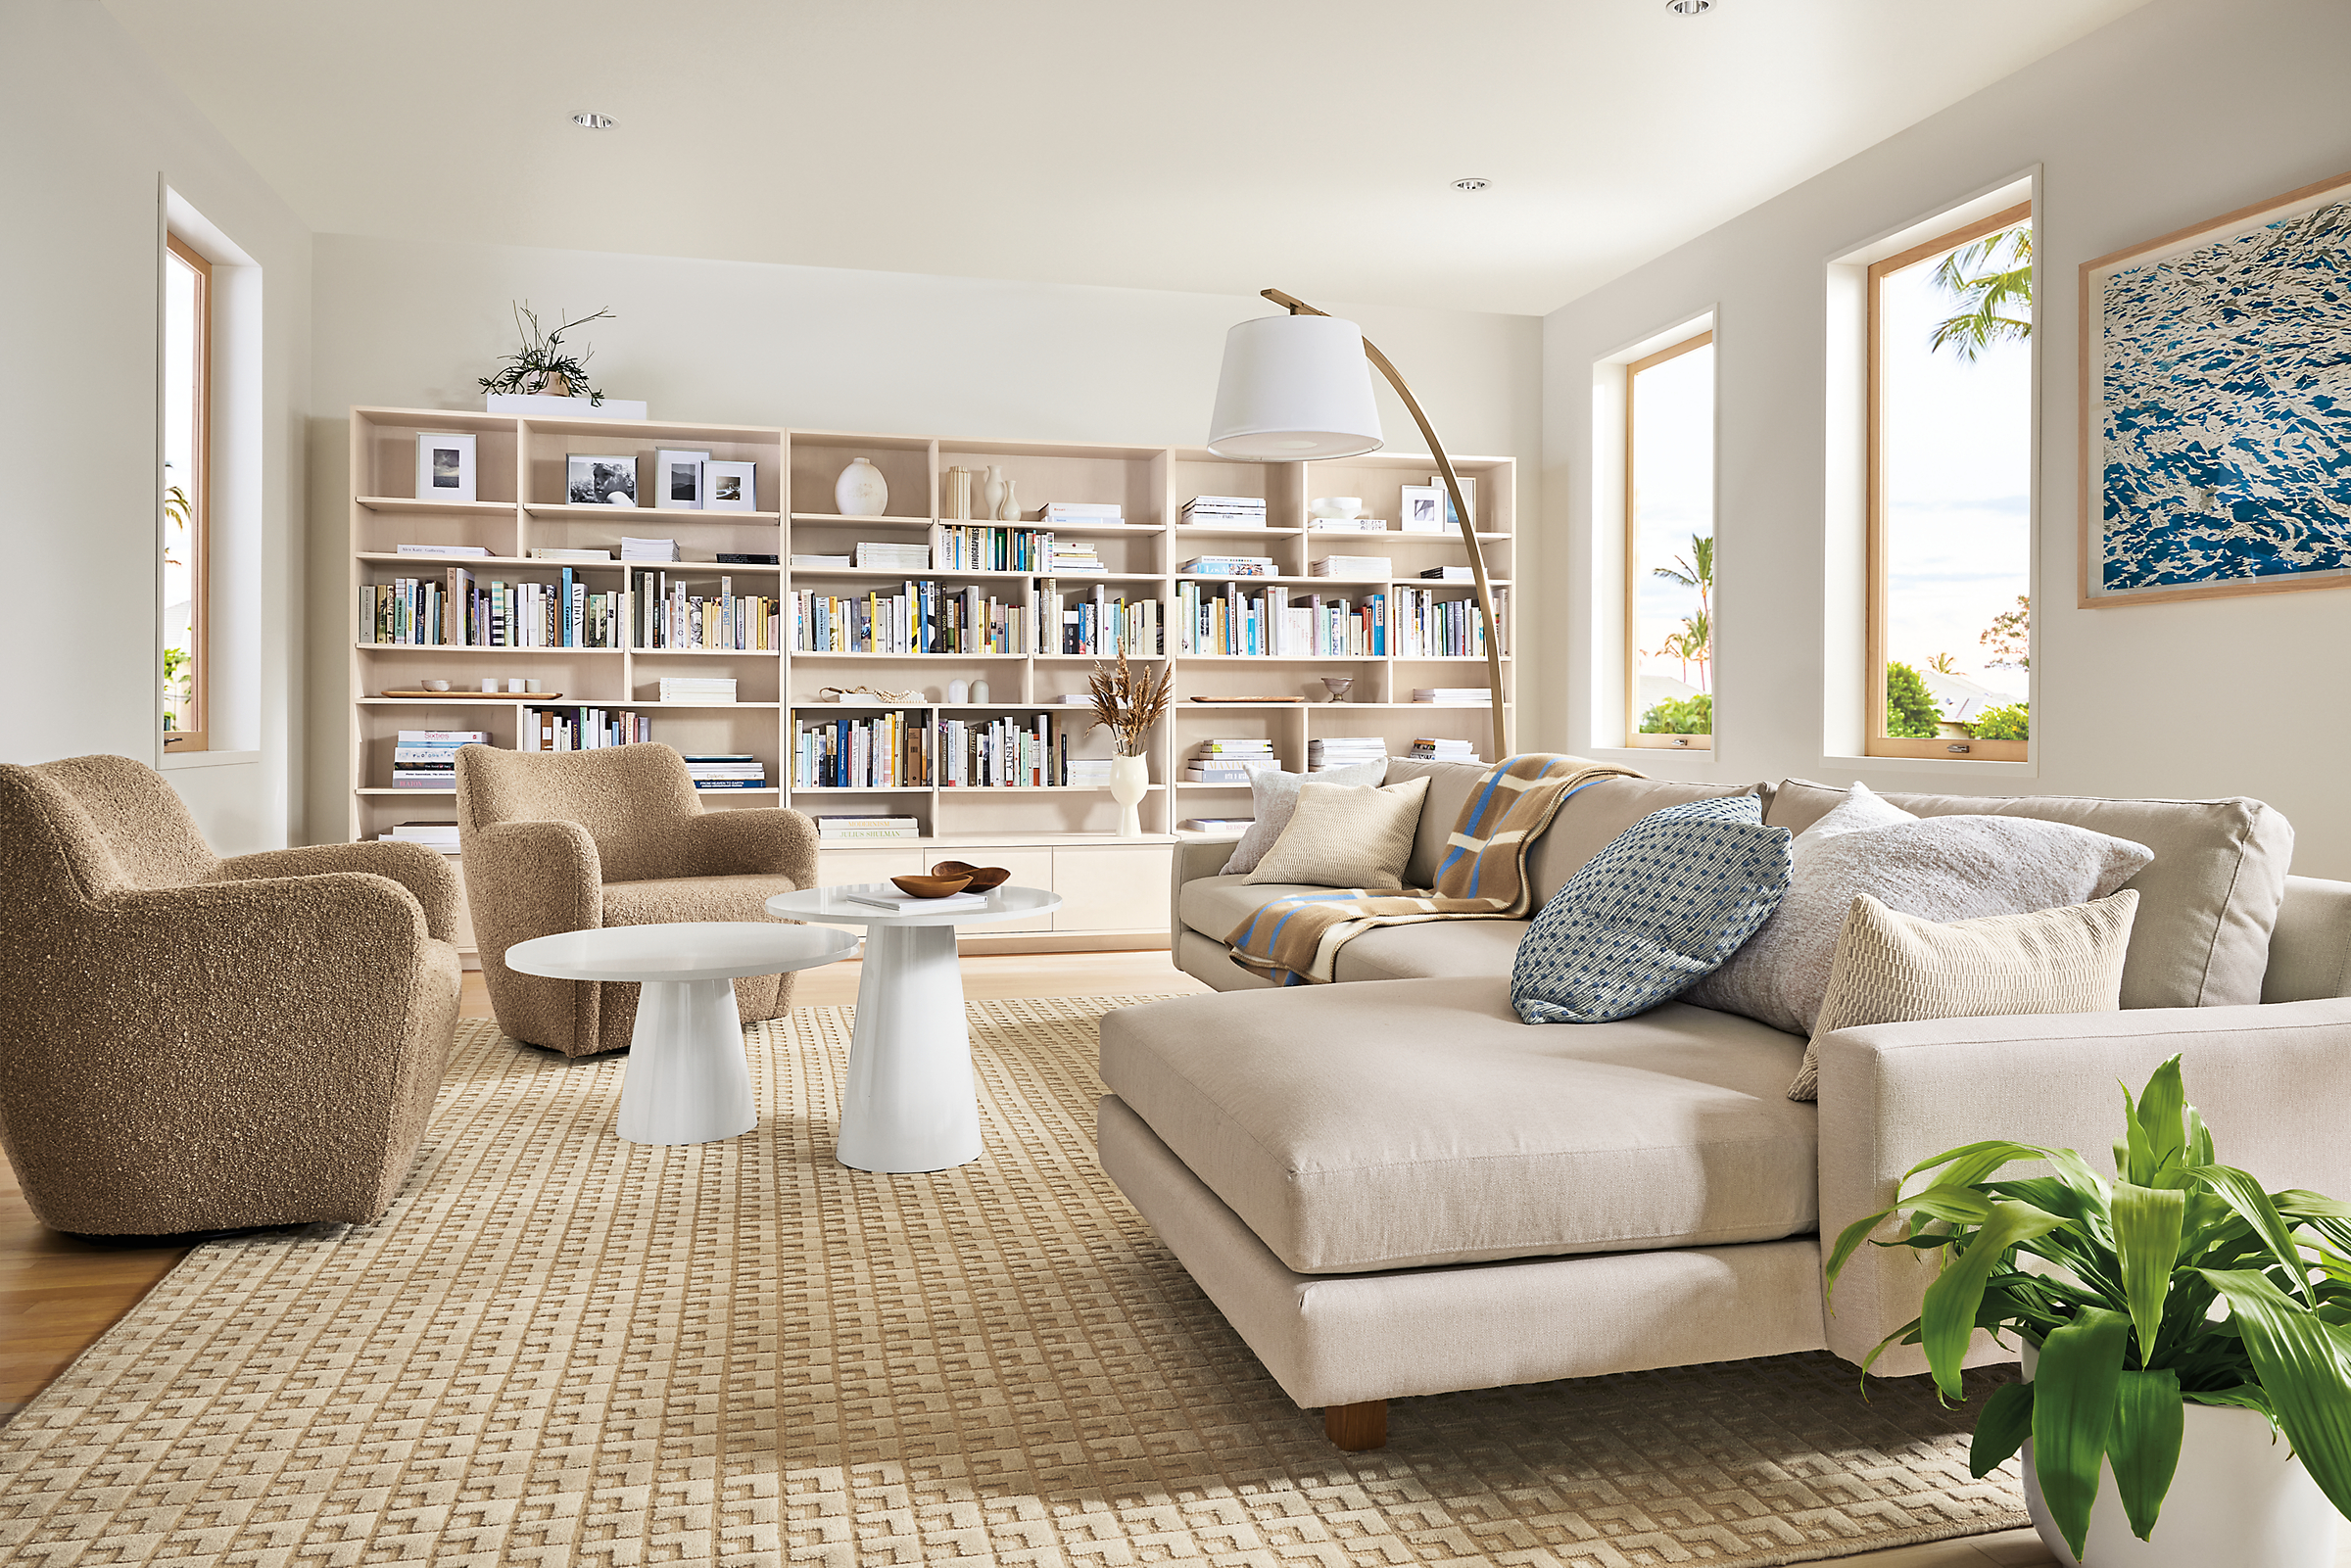 living room with pierson sofa with chaise, two lily chairs, keaton bookcases.